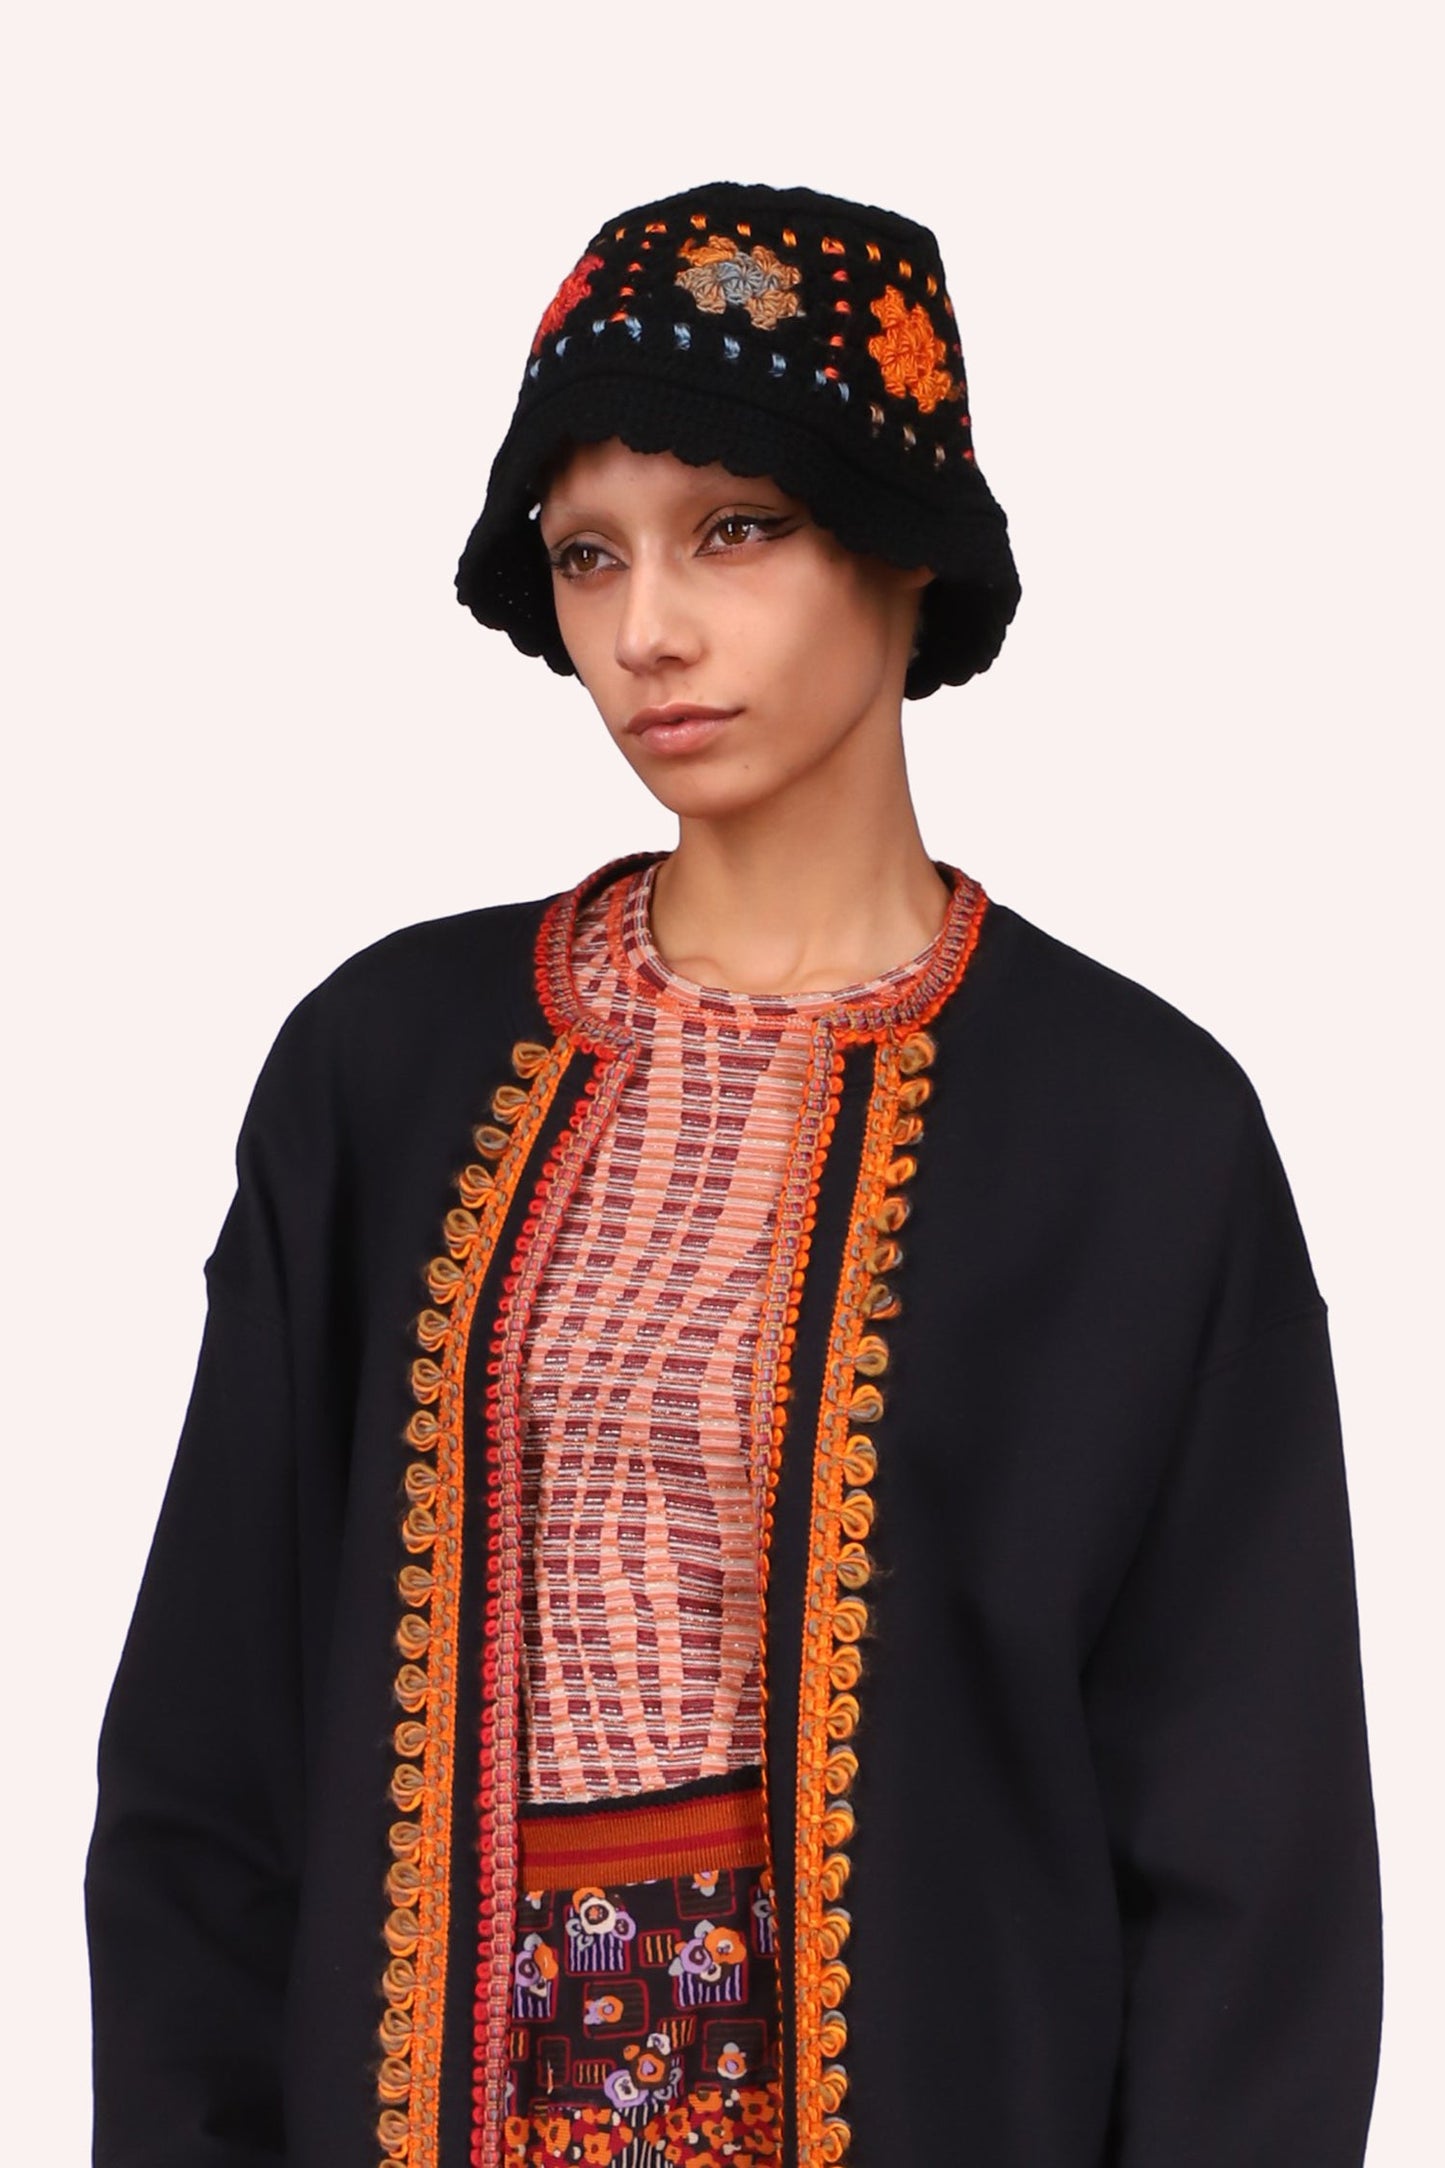 Ombre Crochet Bucket Hat Orange cover ears and forehead, floral stylized beige and orange